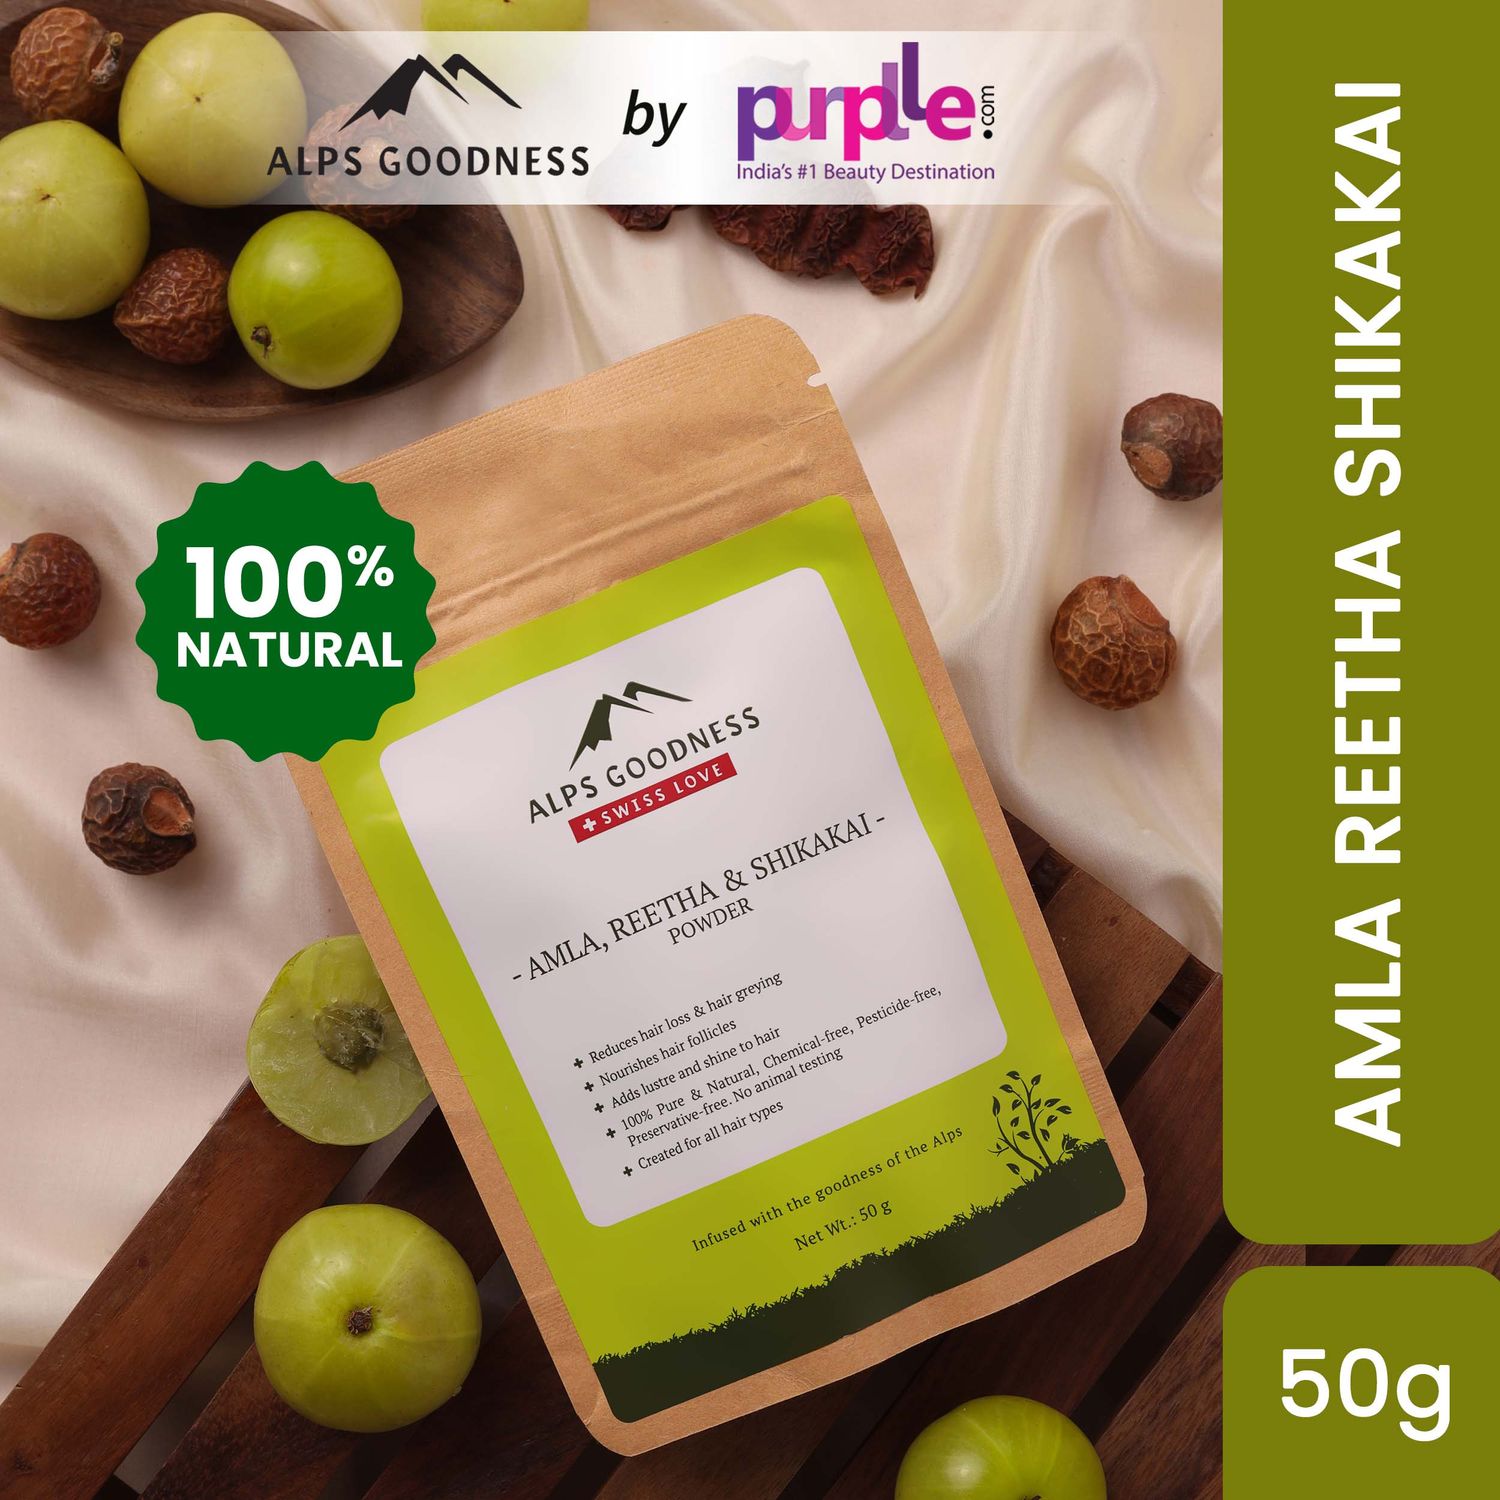 Buy Alps Goodness Amla Reetha & Shikakai(50 gm) | 100% Natural Powder | No Chemicals, No Preservatives, No Pesticides | Promotes Hair Growth| Hair Mask | Strenghtens Hair | For silky smooth hair - Purplle